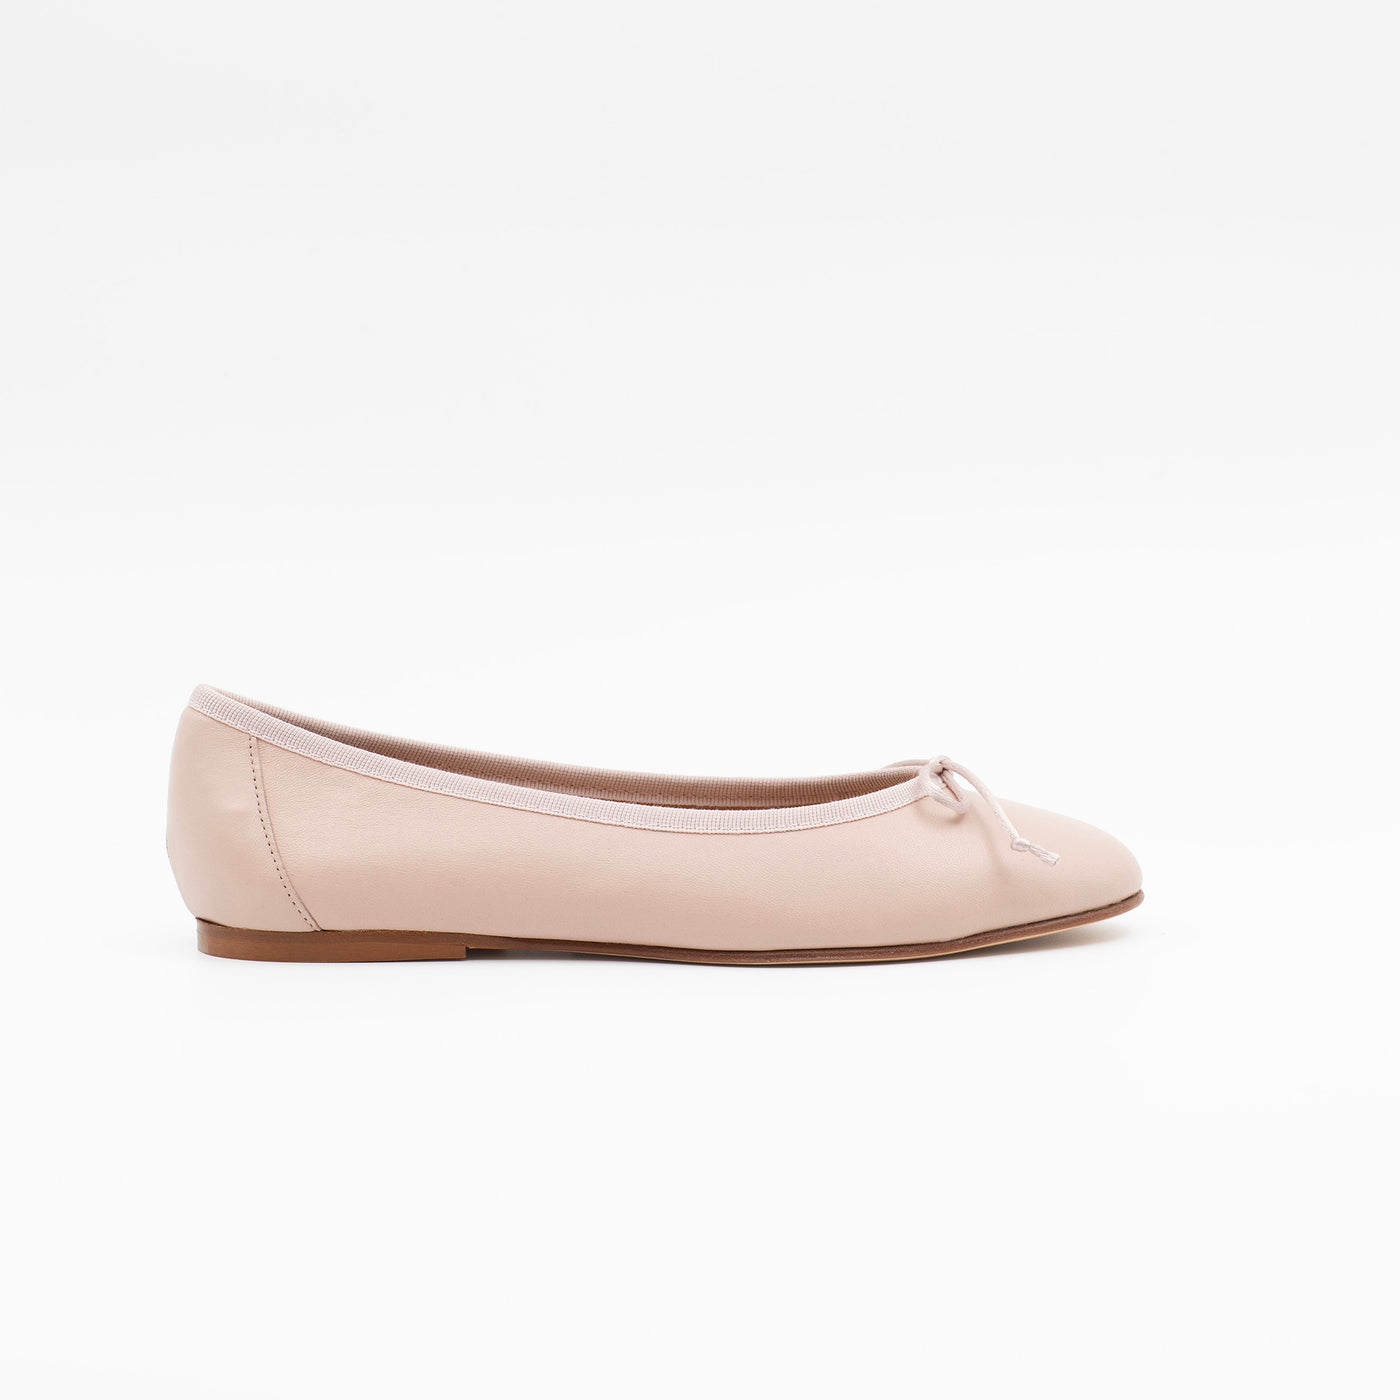 Ballet flat in pale pink leather